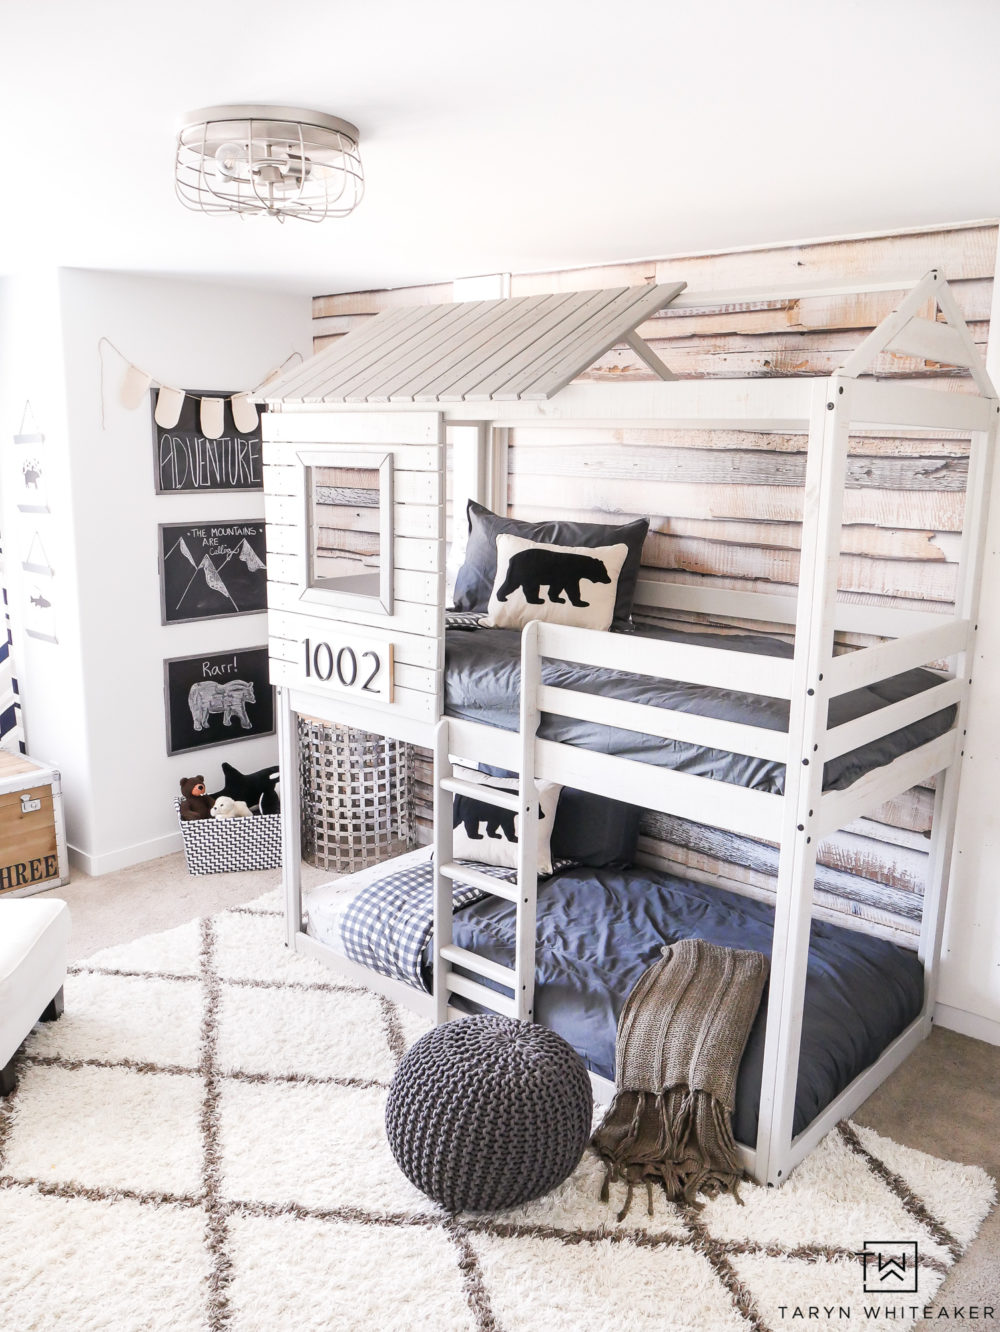 Take a tour of this Mountain Modern Boys Bedroom complete with a treehouse bunkbed and bear accents.